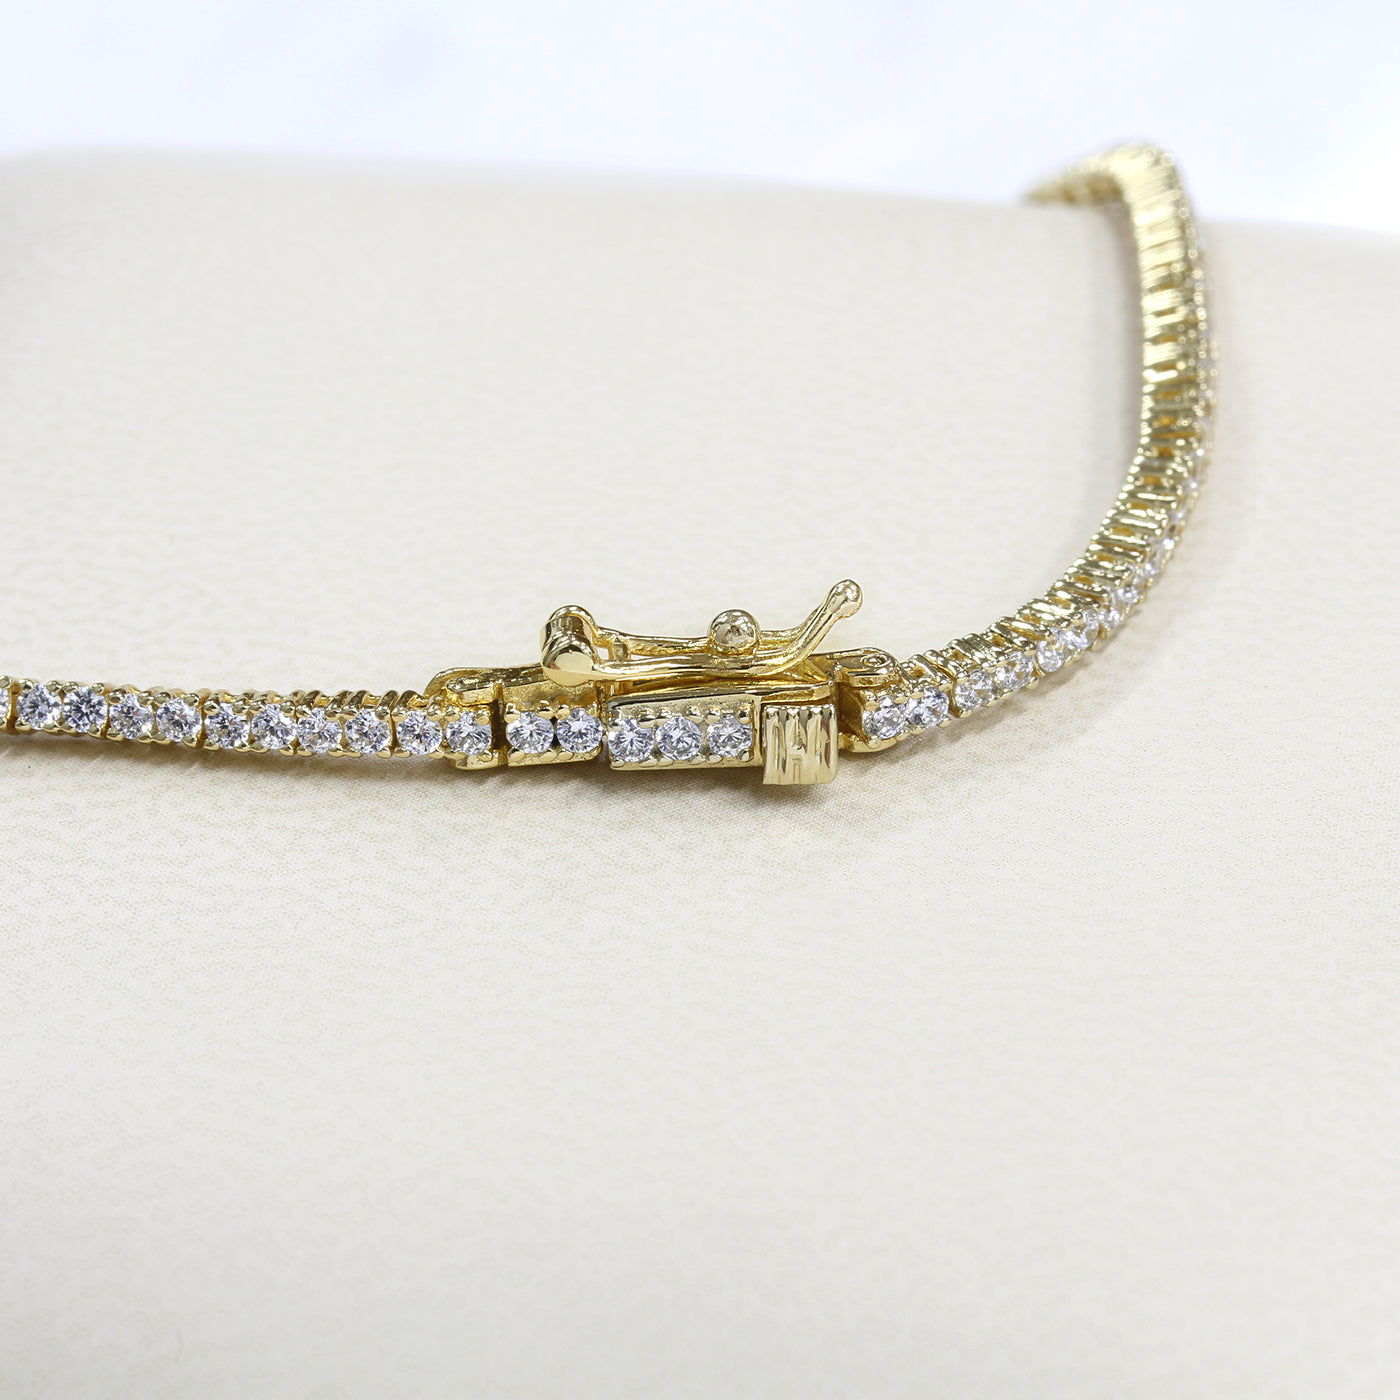 Classic Round Brilliant Tennis Bracelet, 14K Gold Plated Sterling Silver